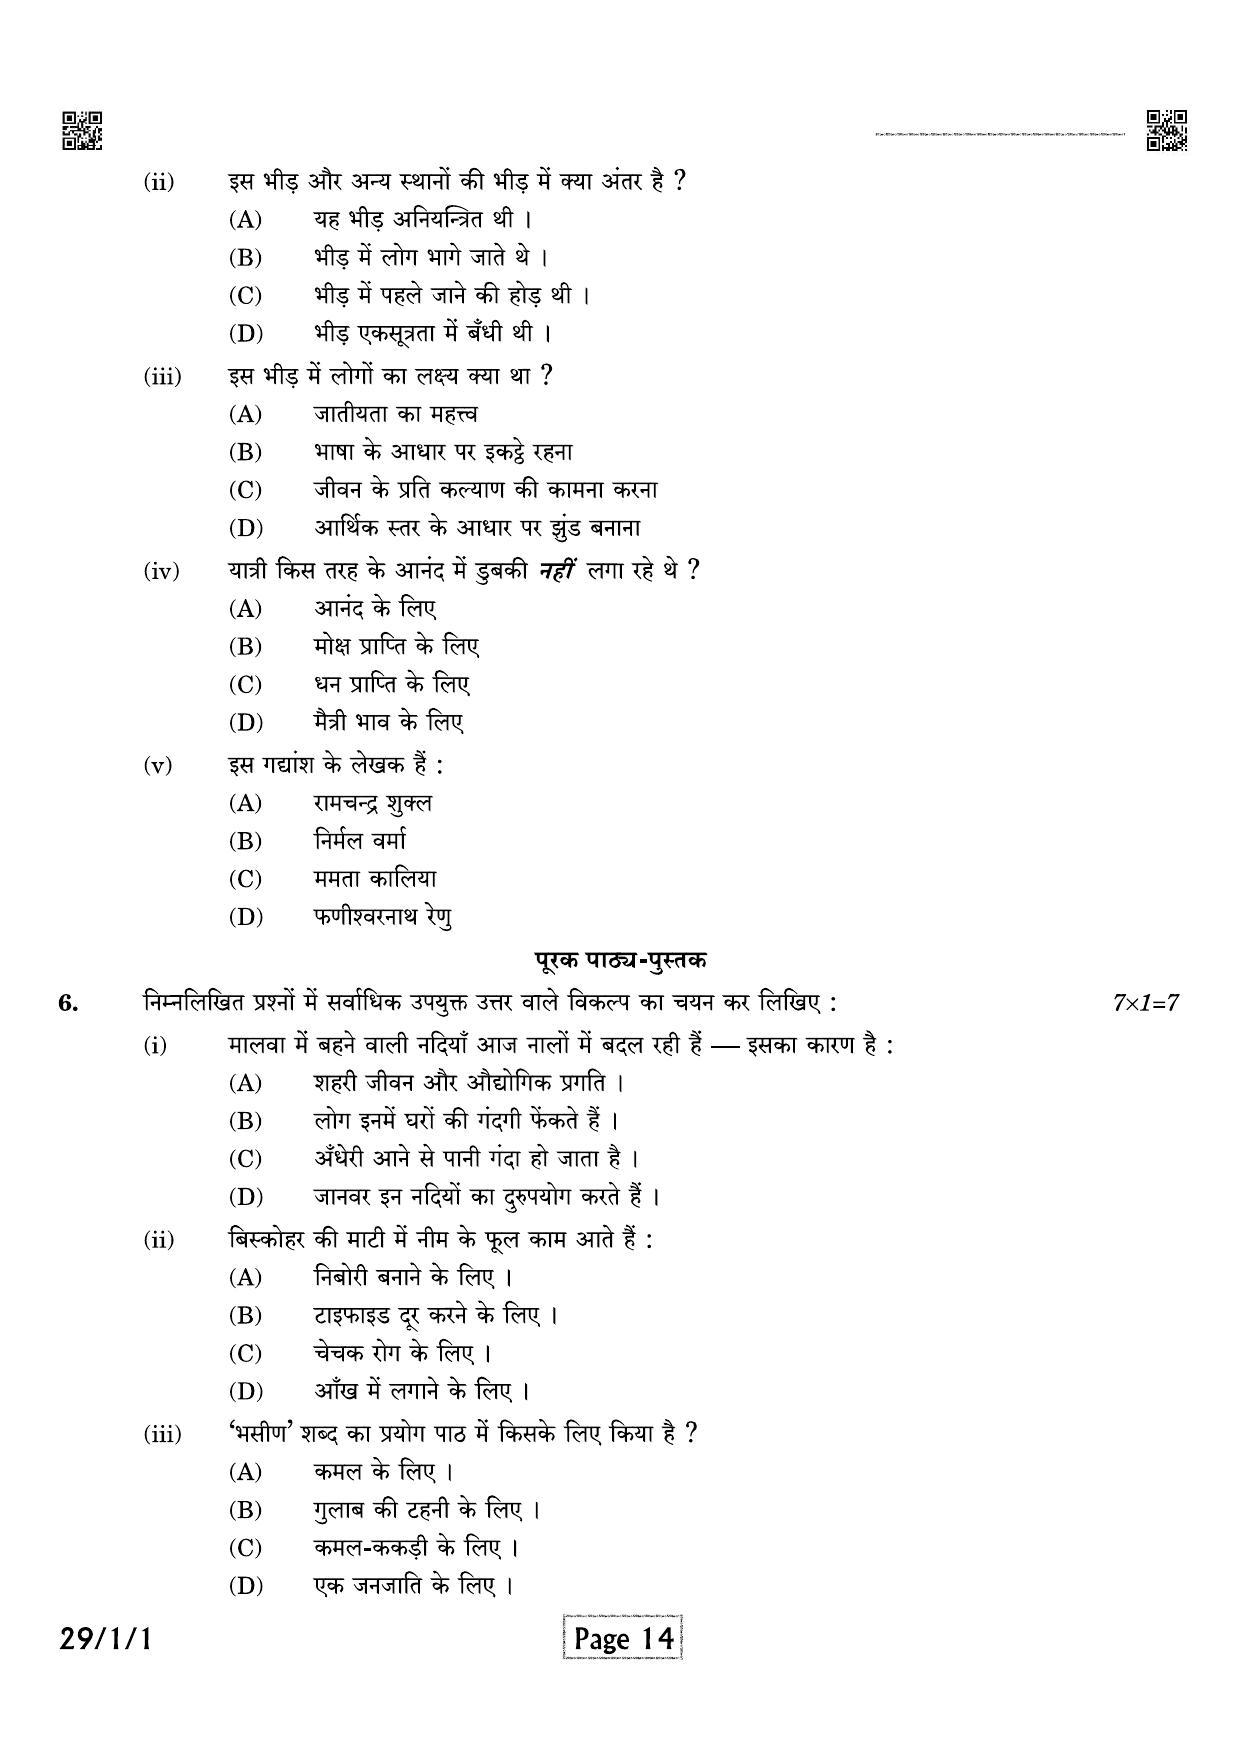 CBSE Class 12 QP_002_HINDI_ELECTIVE 2021 Compartment Question Paper - Page 14